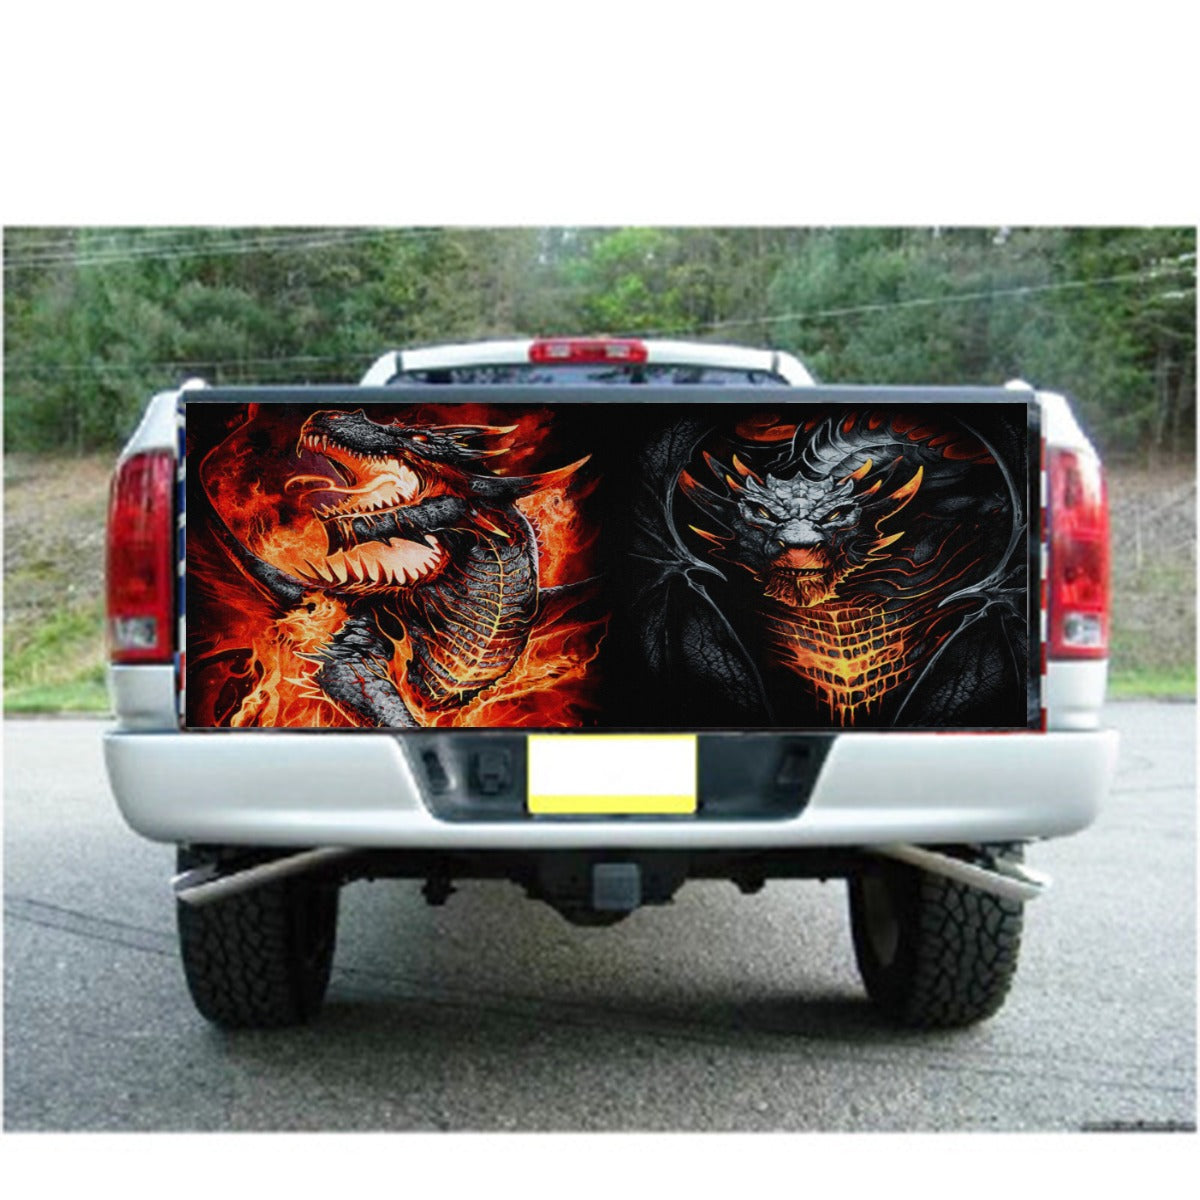 Flaming dragon Truck Bed Decal